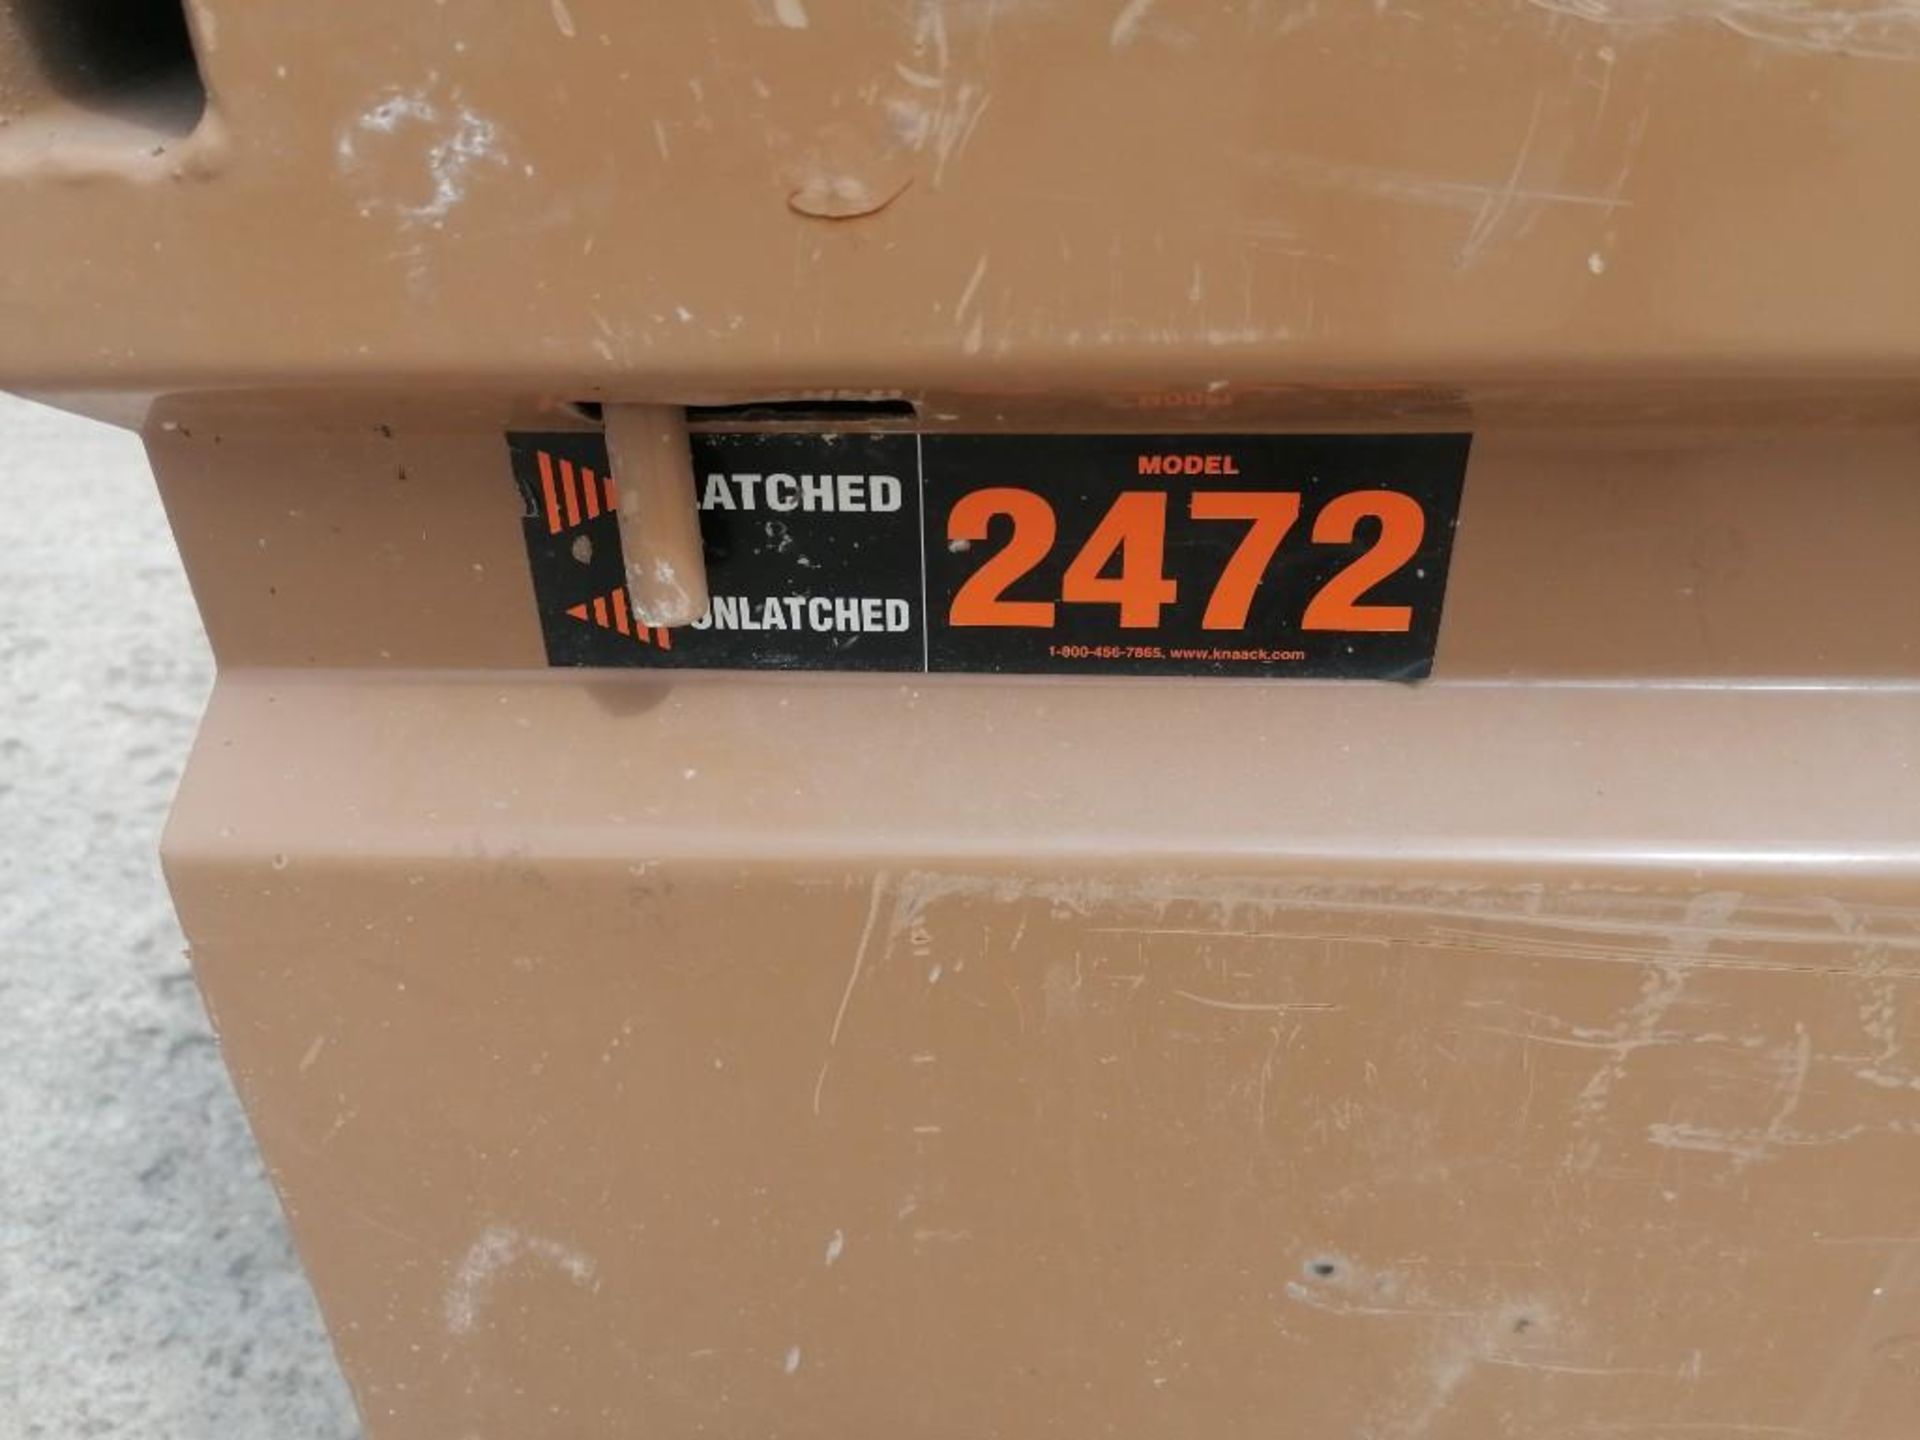 KNAACK Job Box Model 2472 with (57) Scaffolding brackets. Located at 301 E Henry Street, Mt. - Image 2 of 4